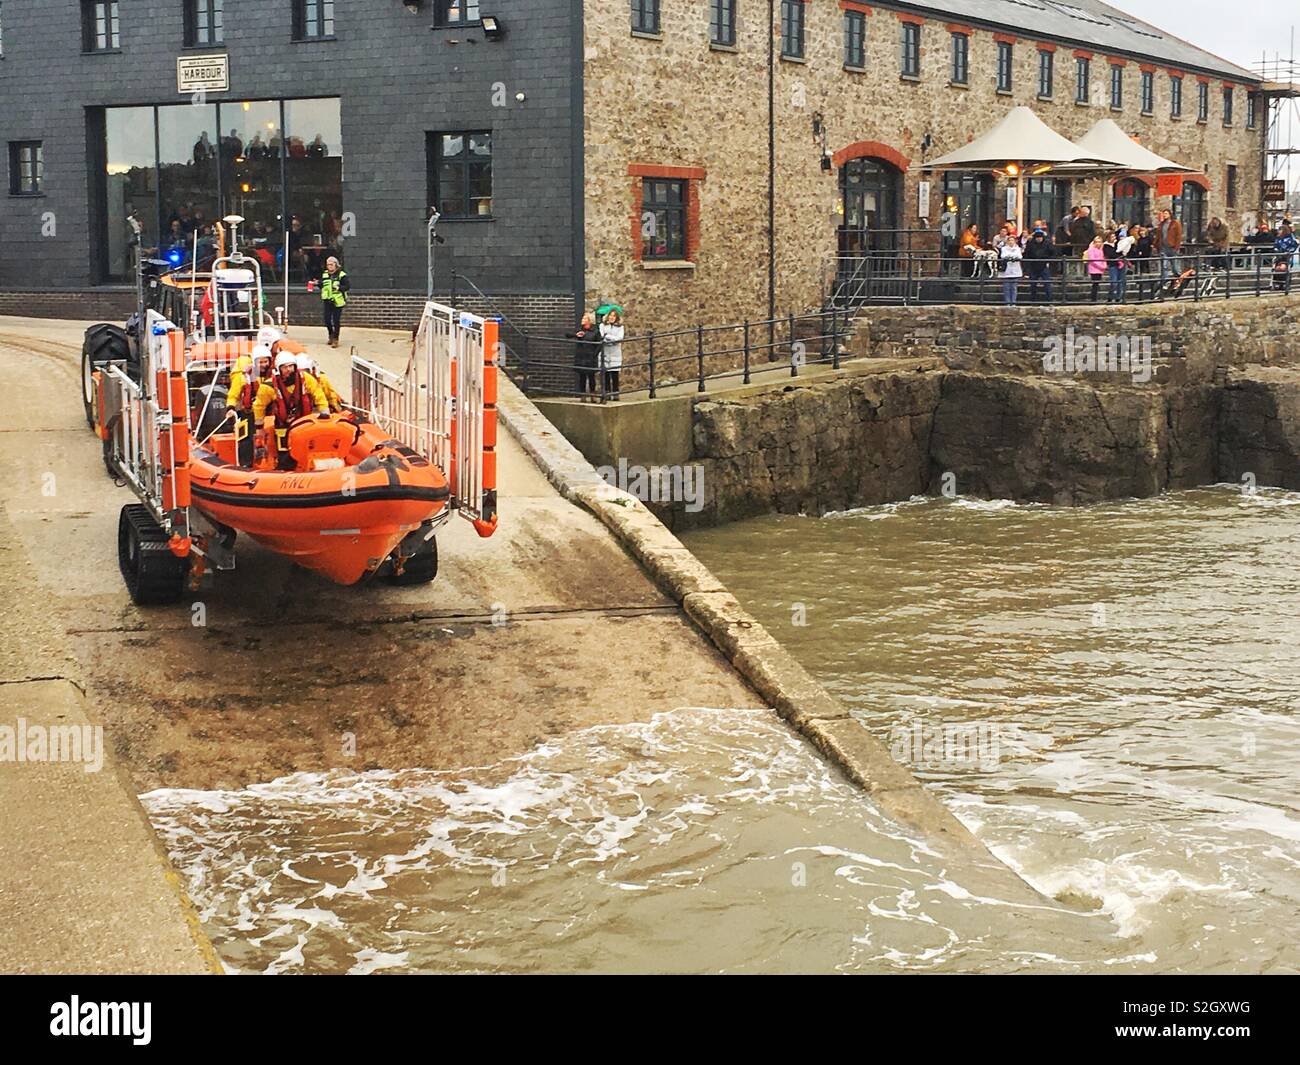 To the rescue! Lifeboat launches to mayday distress call whilst public watch Stock Photo